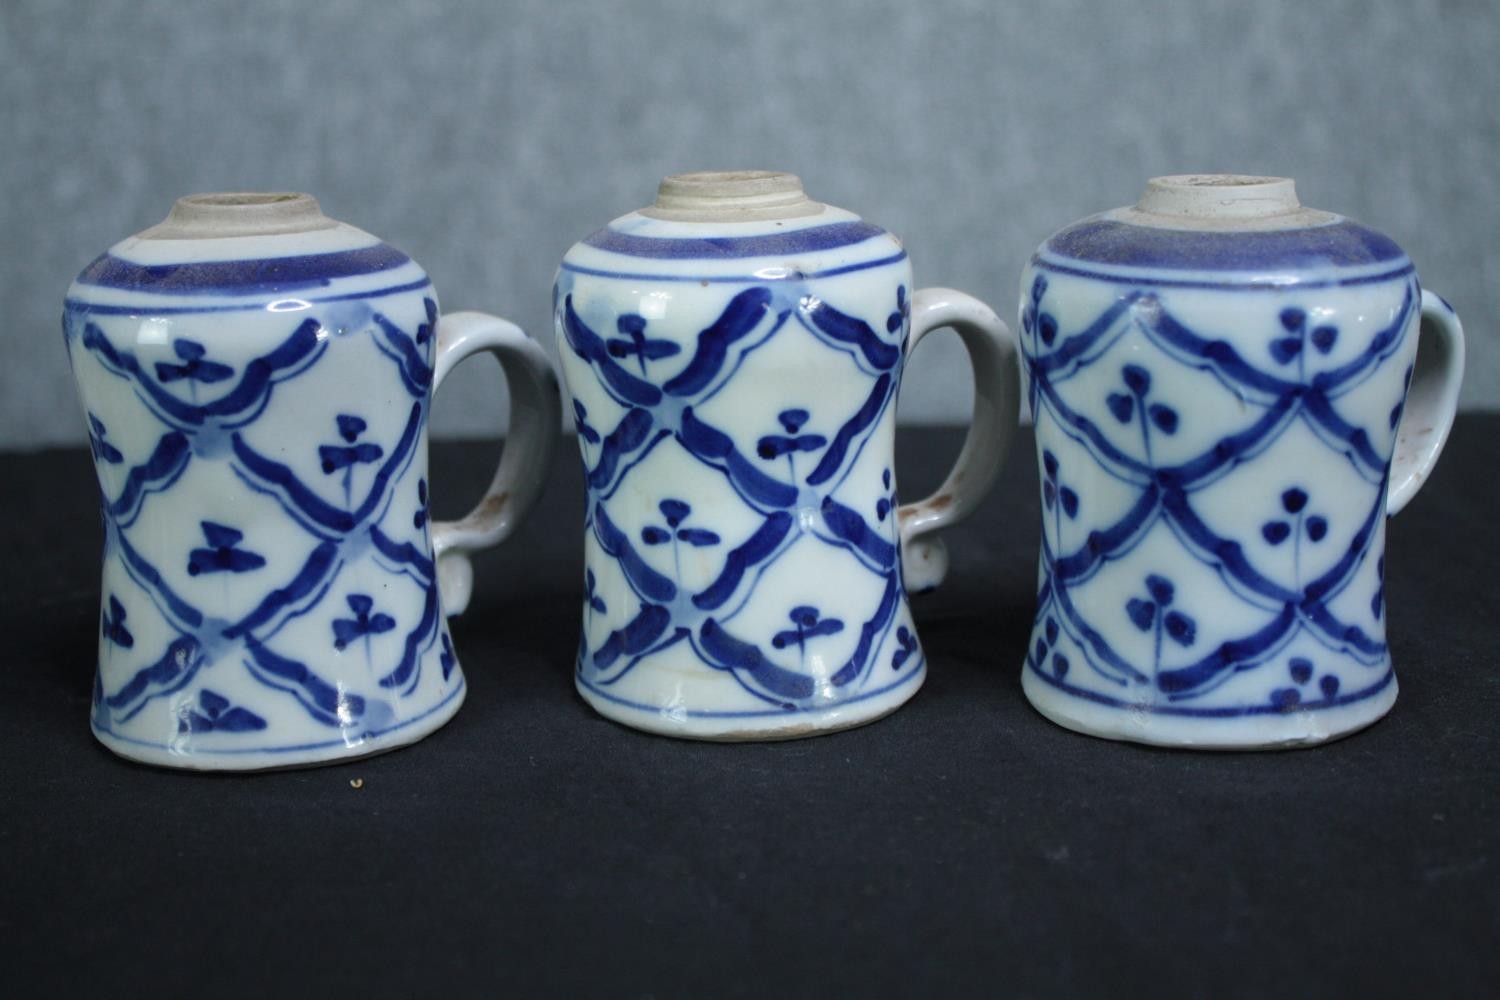 A mixed collection of blue and white Chinese porcelain including a teapot and vases. Signed on the - Image 7 of 12